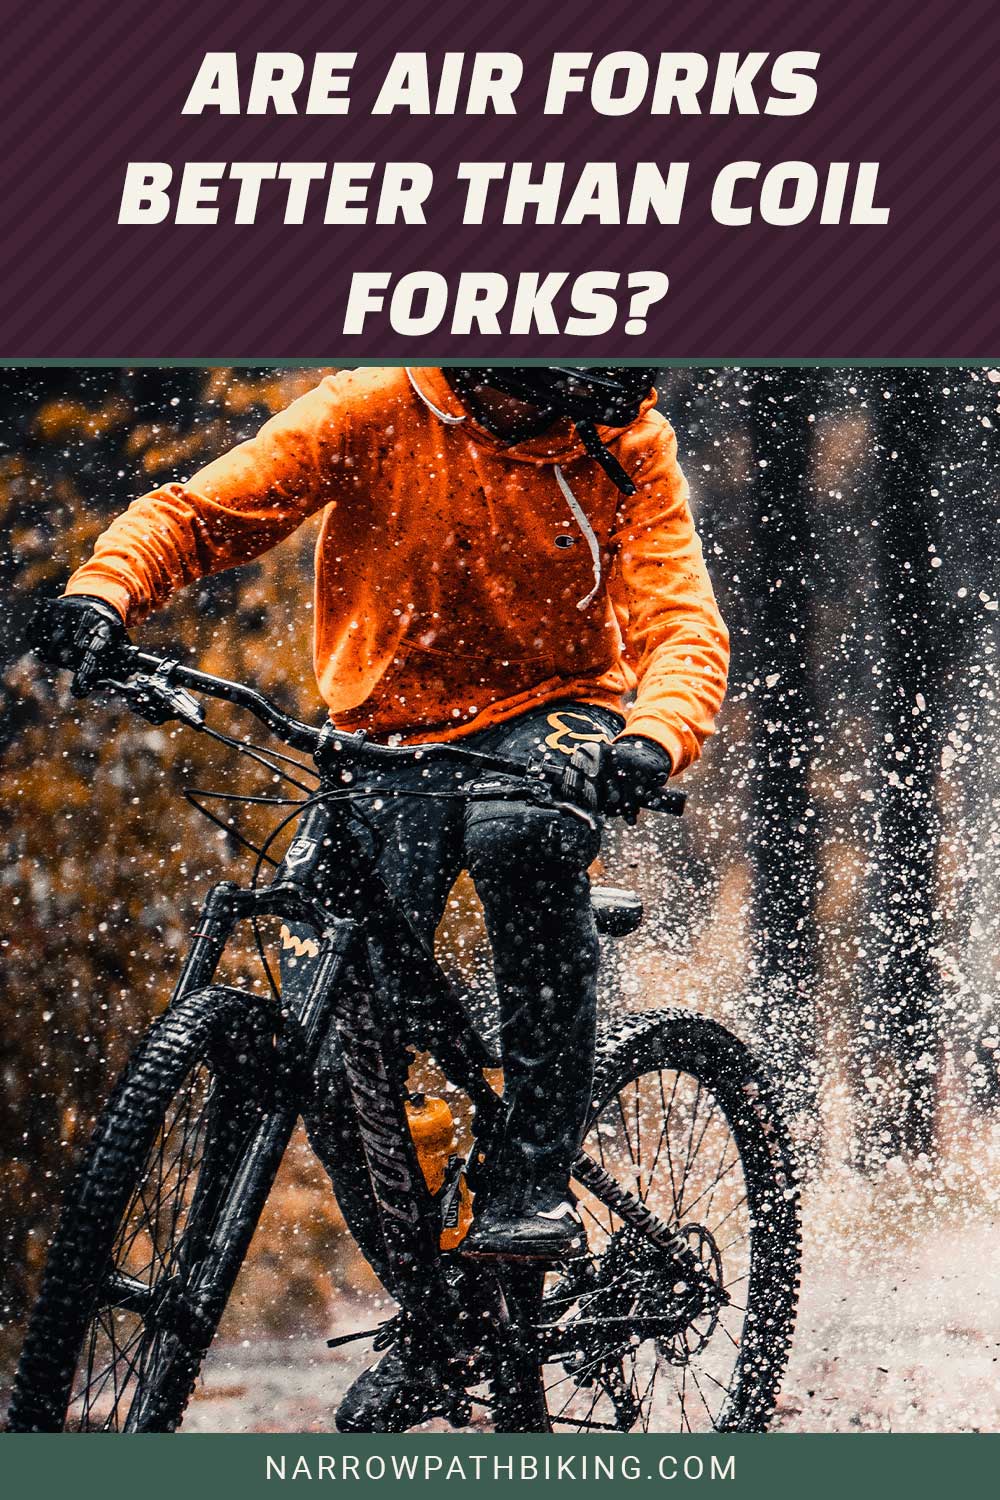 Are Air Forks Better Than Coil Forks?